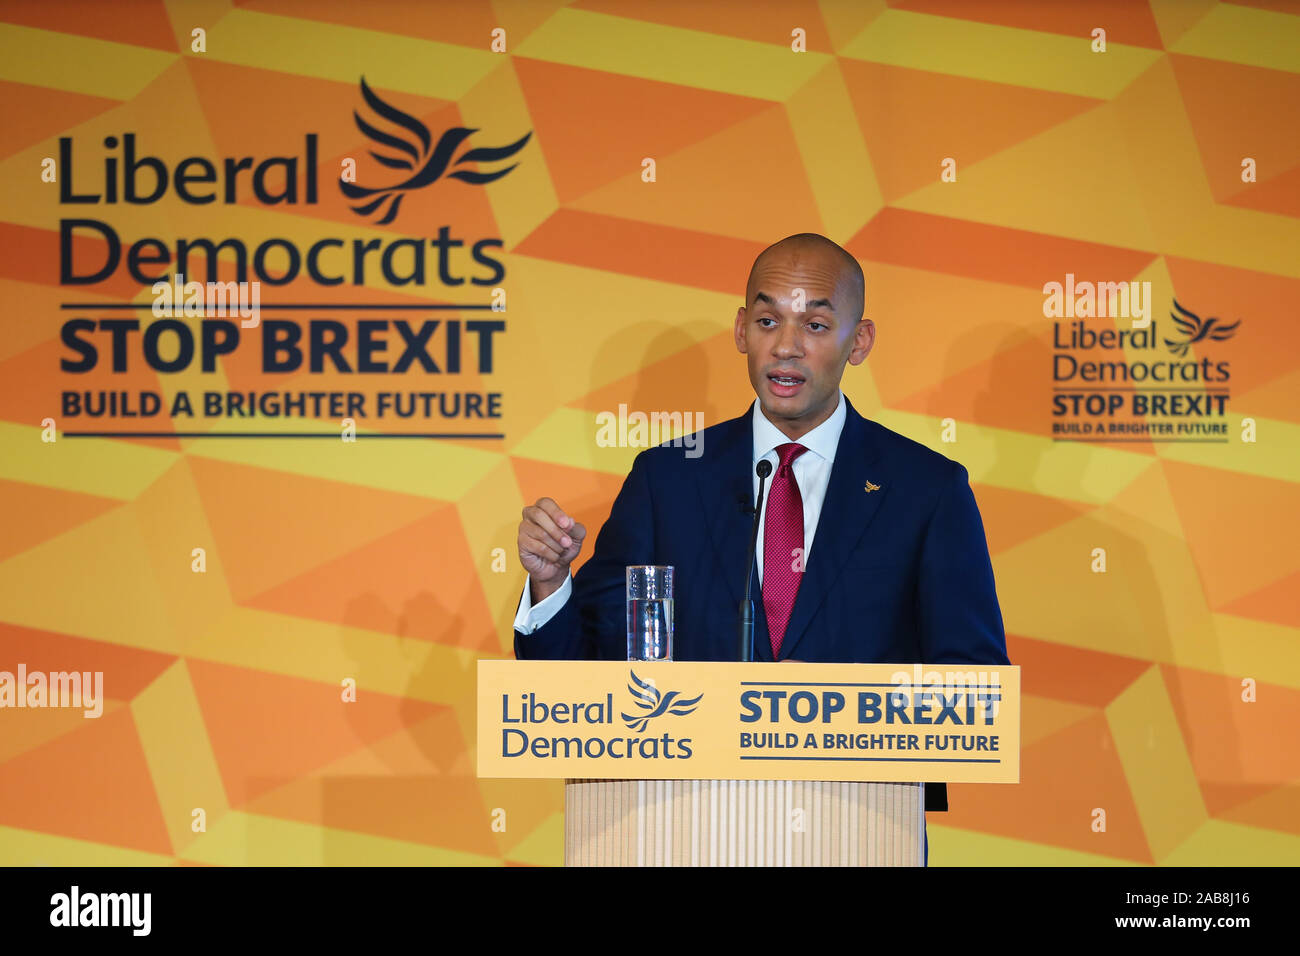 Liberal Democrat Foreign Affairs Spokesman and candidate of Cities of London & Westminster, Chuka Umunna speaks at Watford Football Club on Liberal Democrat foreign policy ahead of the NATO Leaders Conference. Stock Photo